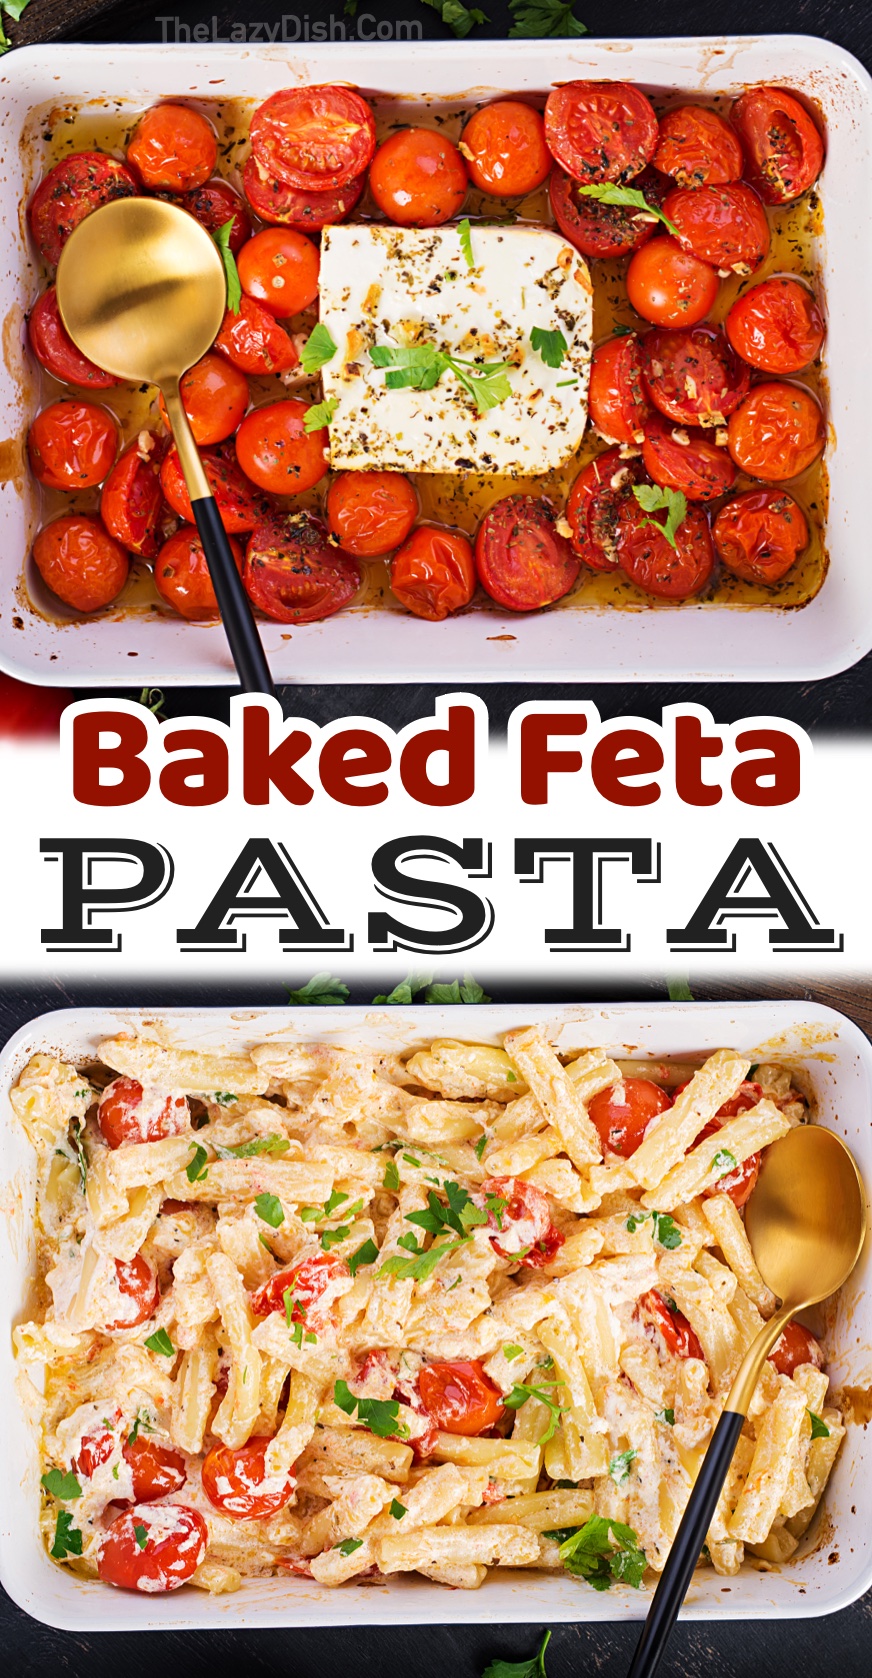 On the hunt for yummy dinner recipes to make? This baked feta pasta is heavenly! It's so simple to make with just a few ingredients yet it is packed full of flavor. I'm not a huge pasta fan, but this meal is where I make the exception. My entire family loves it! Sometimes we add chicken or serve it as a side dish if we have family or friends over for a dinner party. 